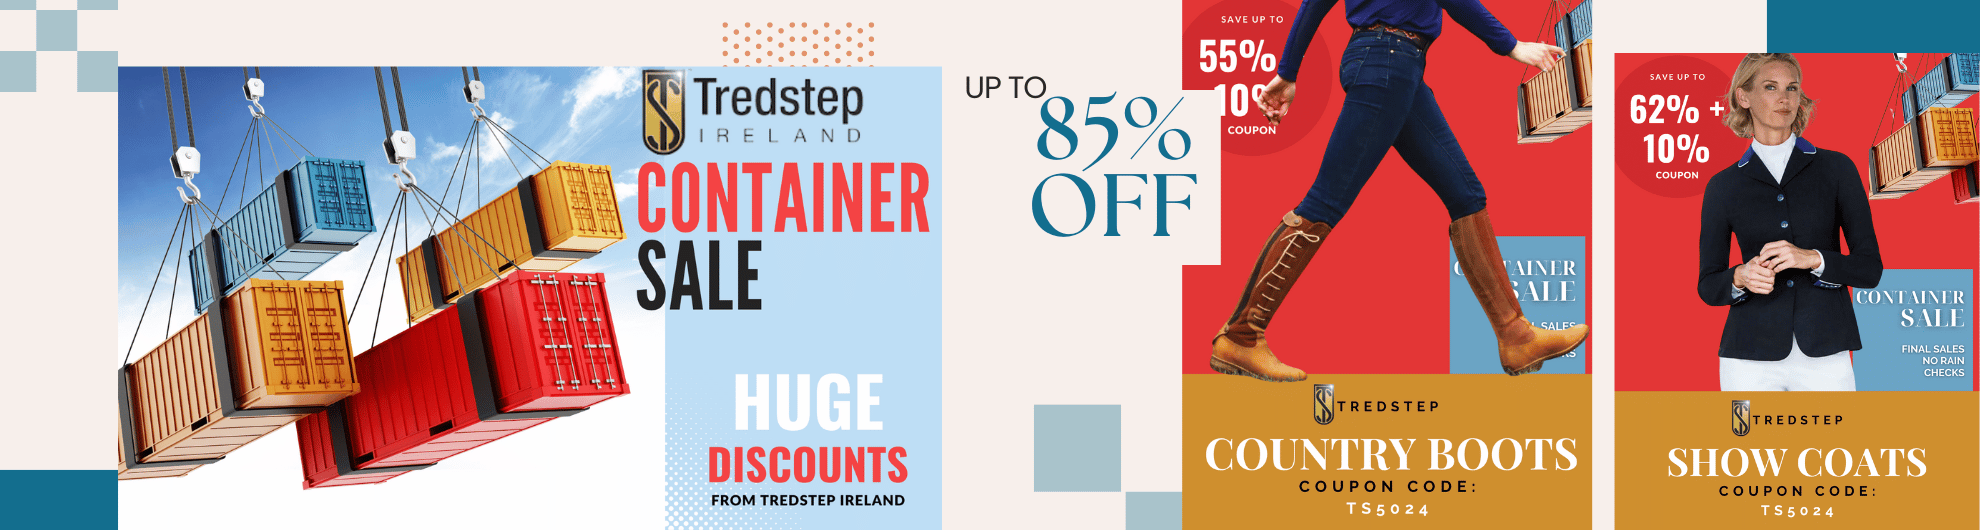 The Tredstep Container Sale